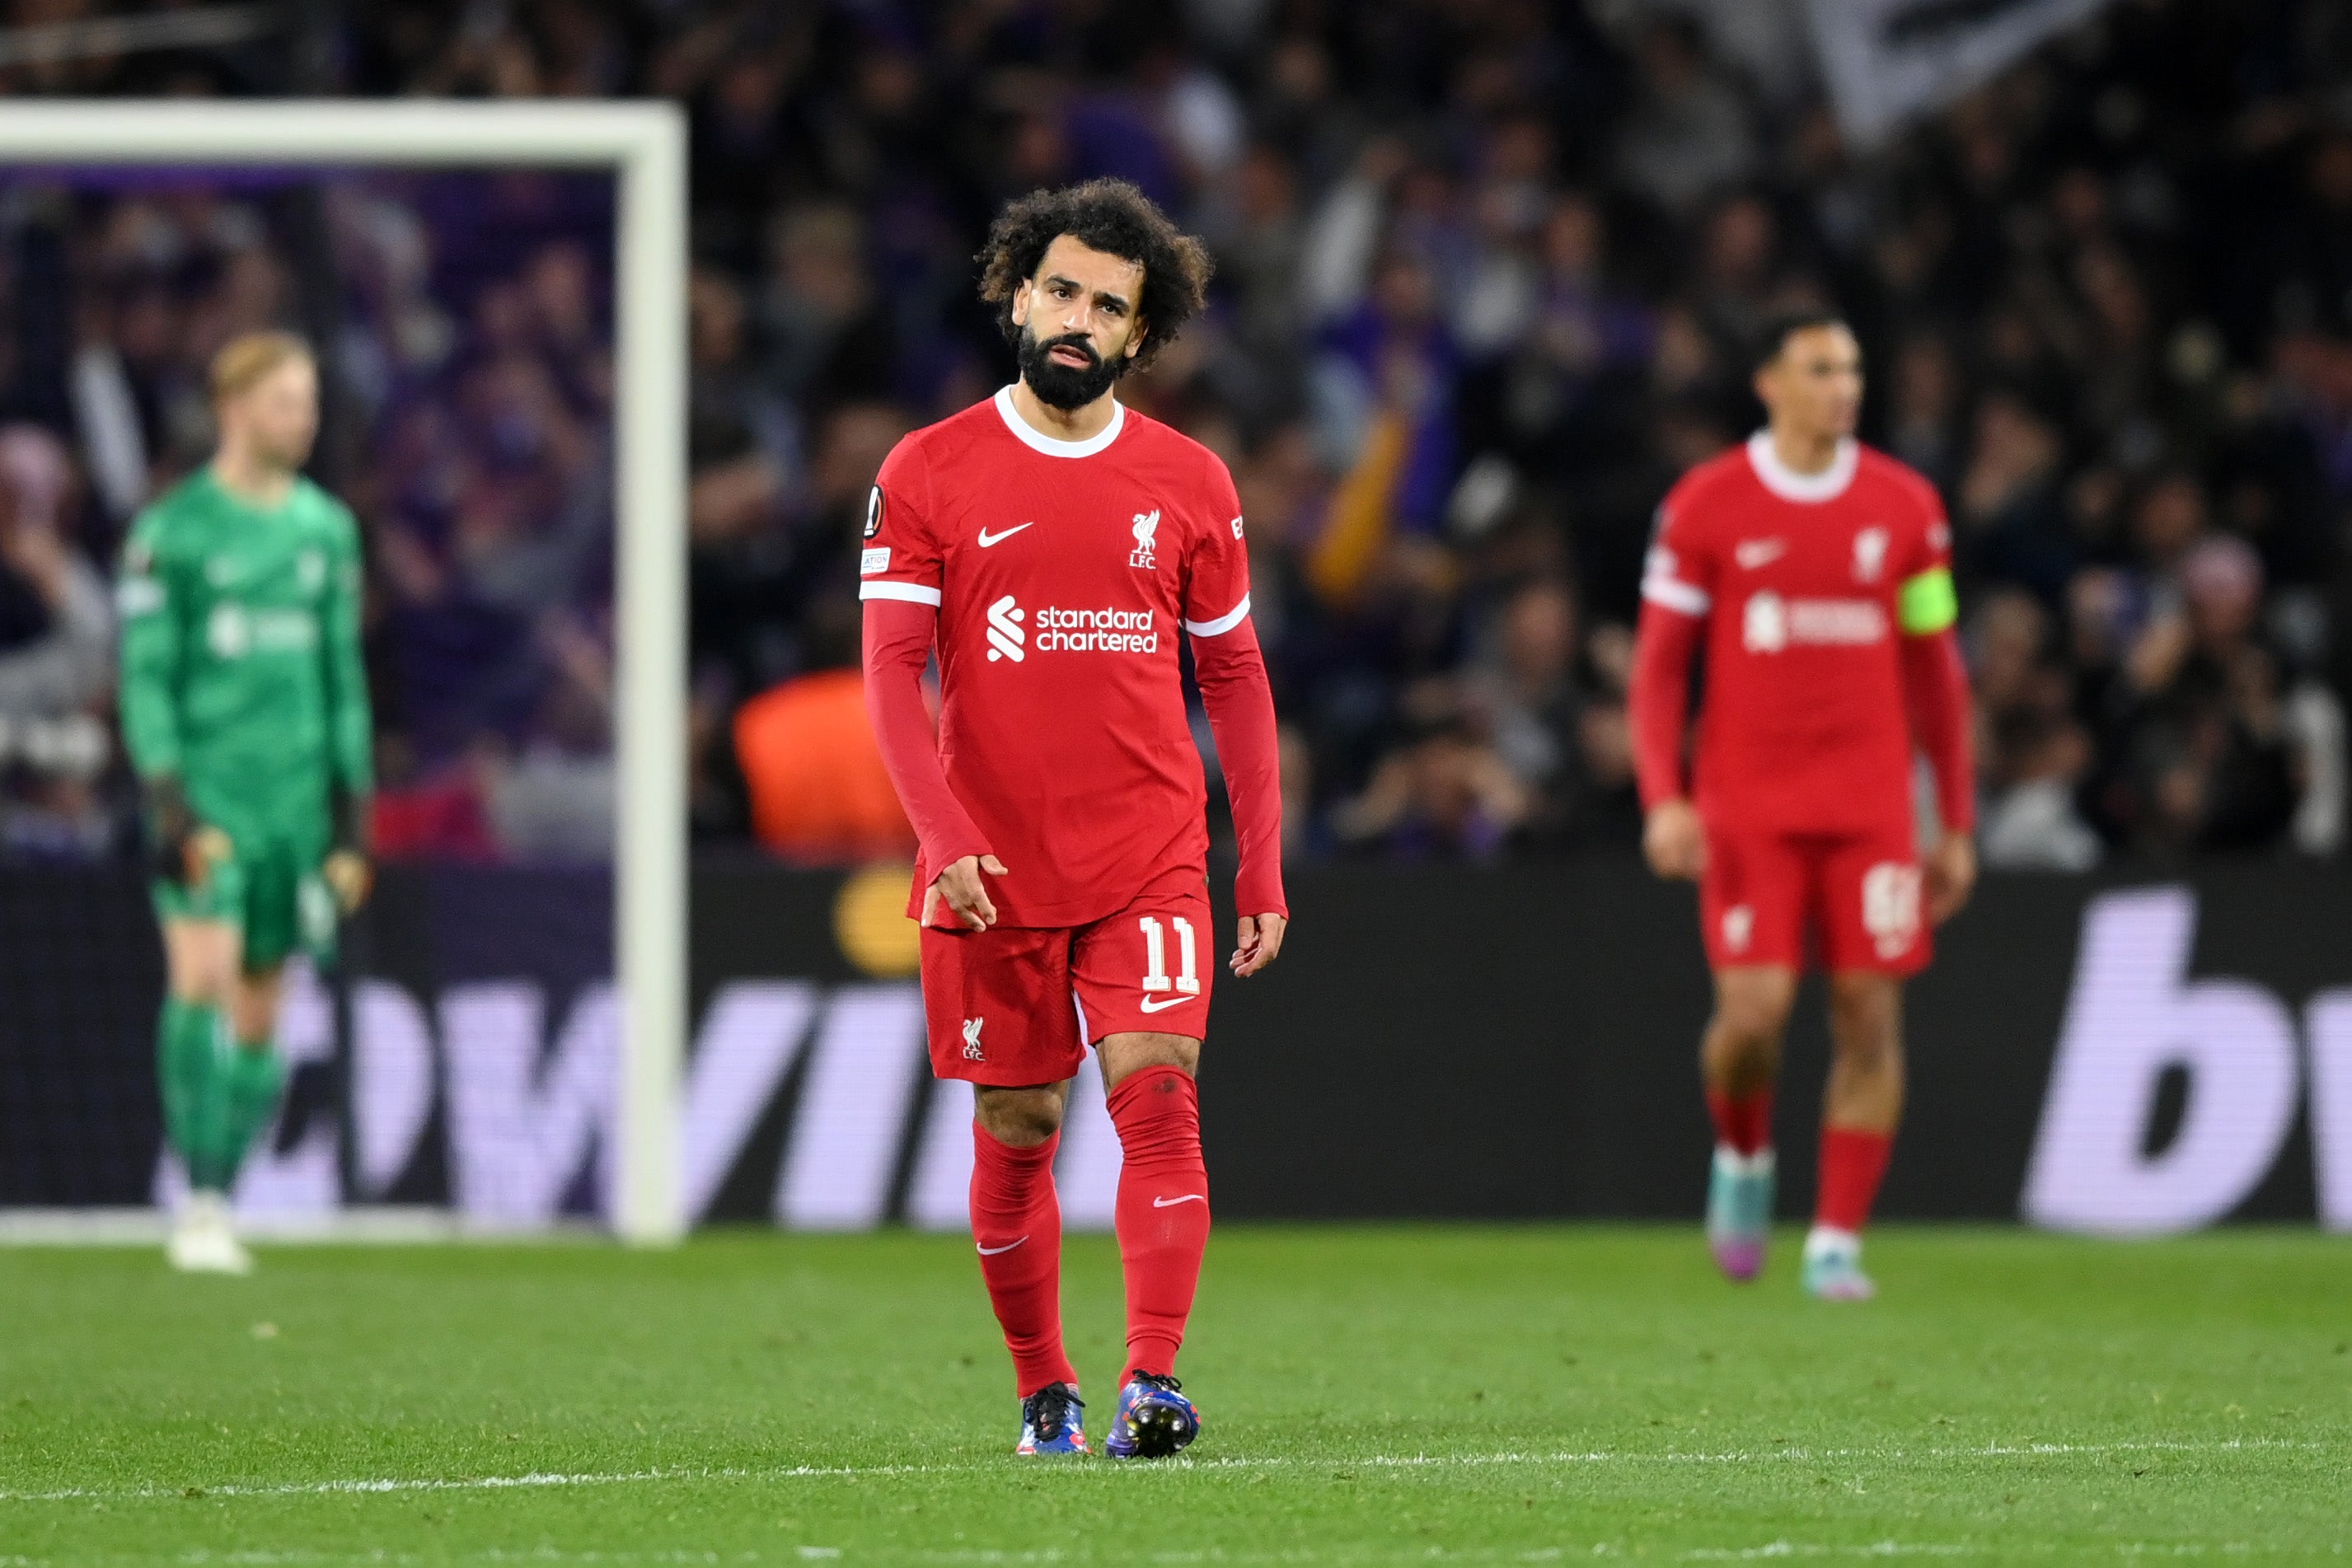 Liverpool slipped to a second defeat of the season